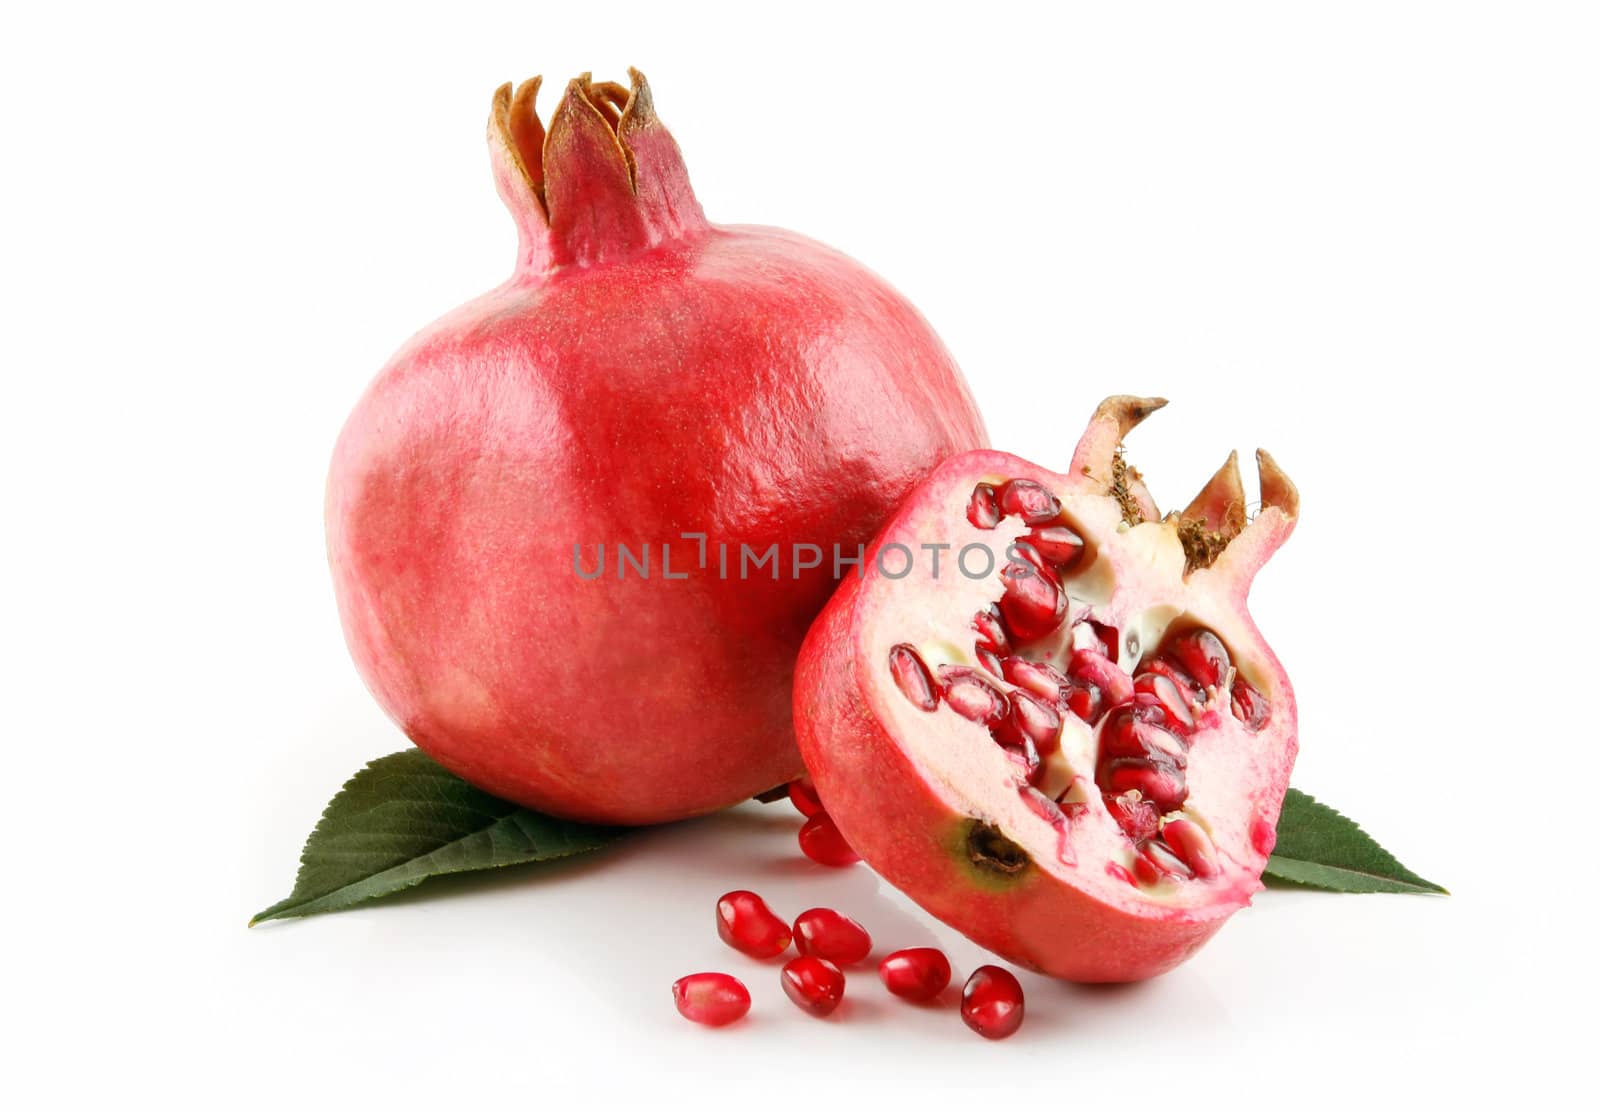 Ripe Sliced Pomegranate Fruit with Seeds Isolated on White Background